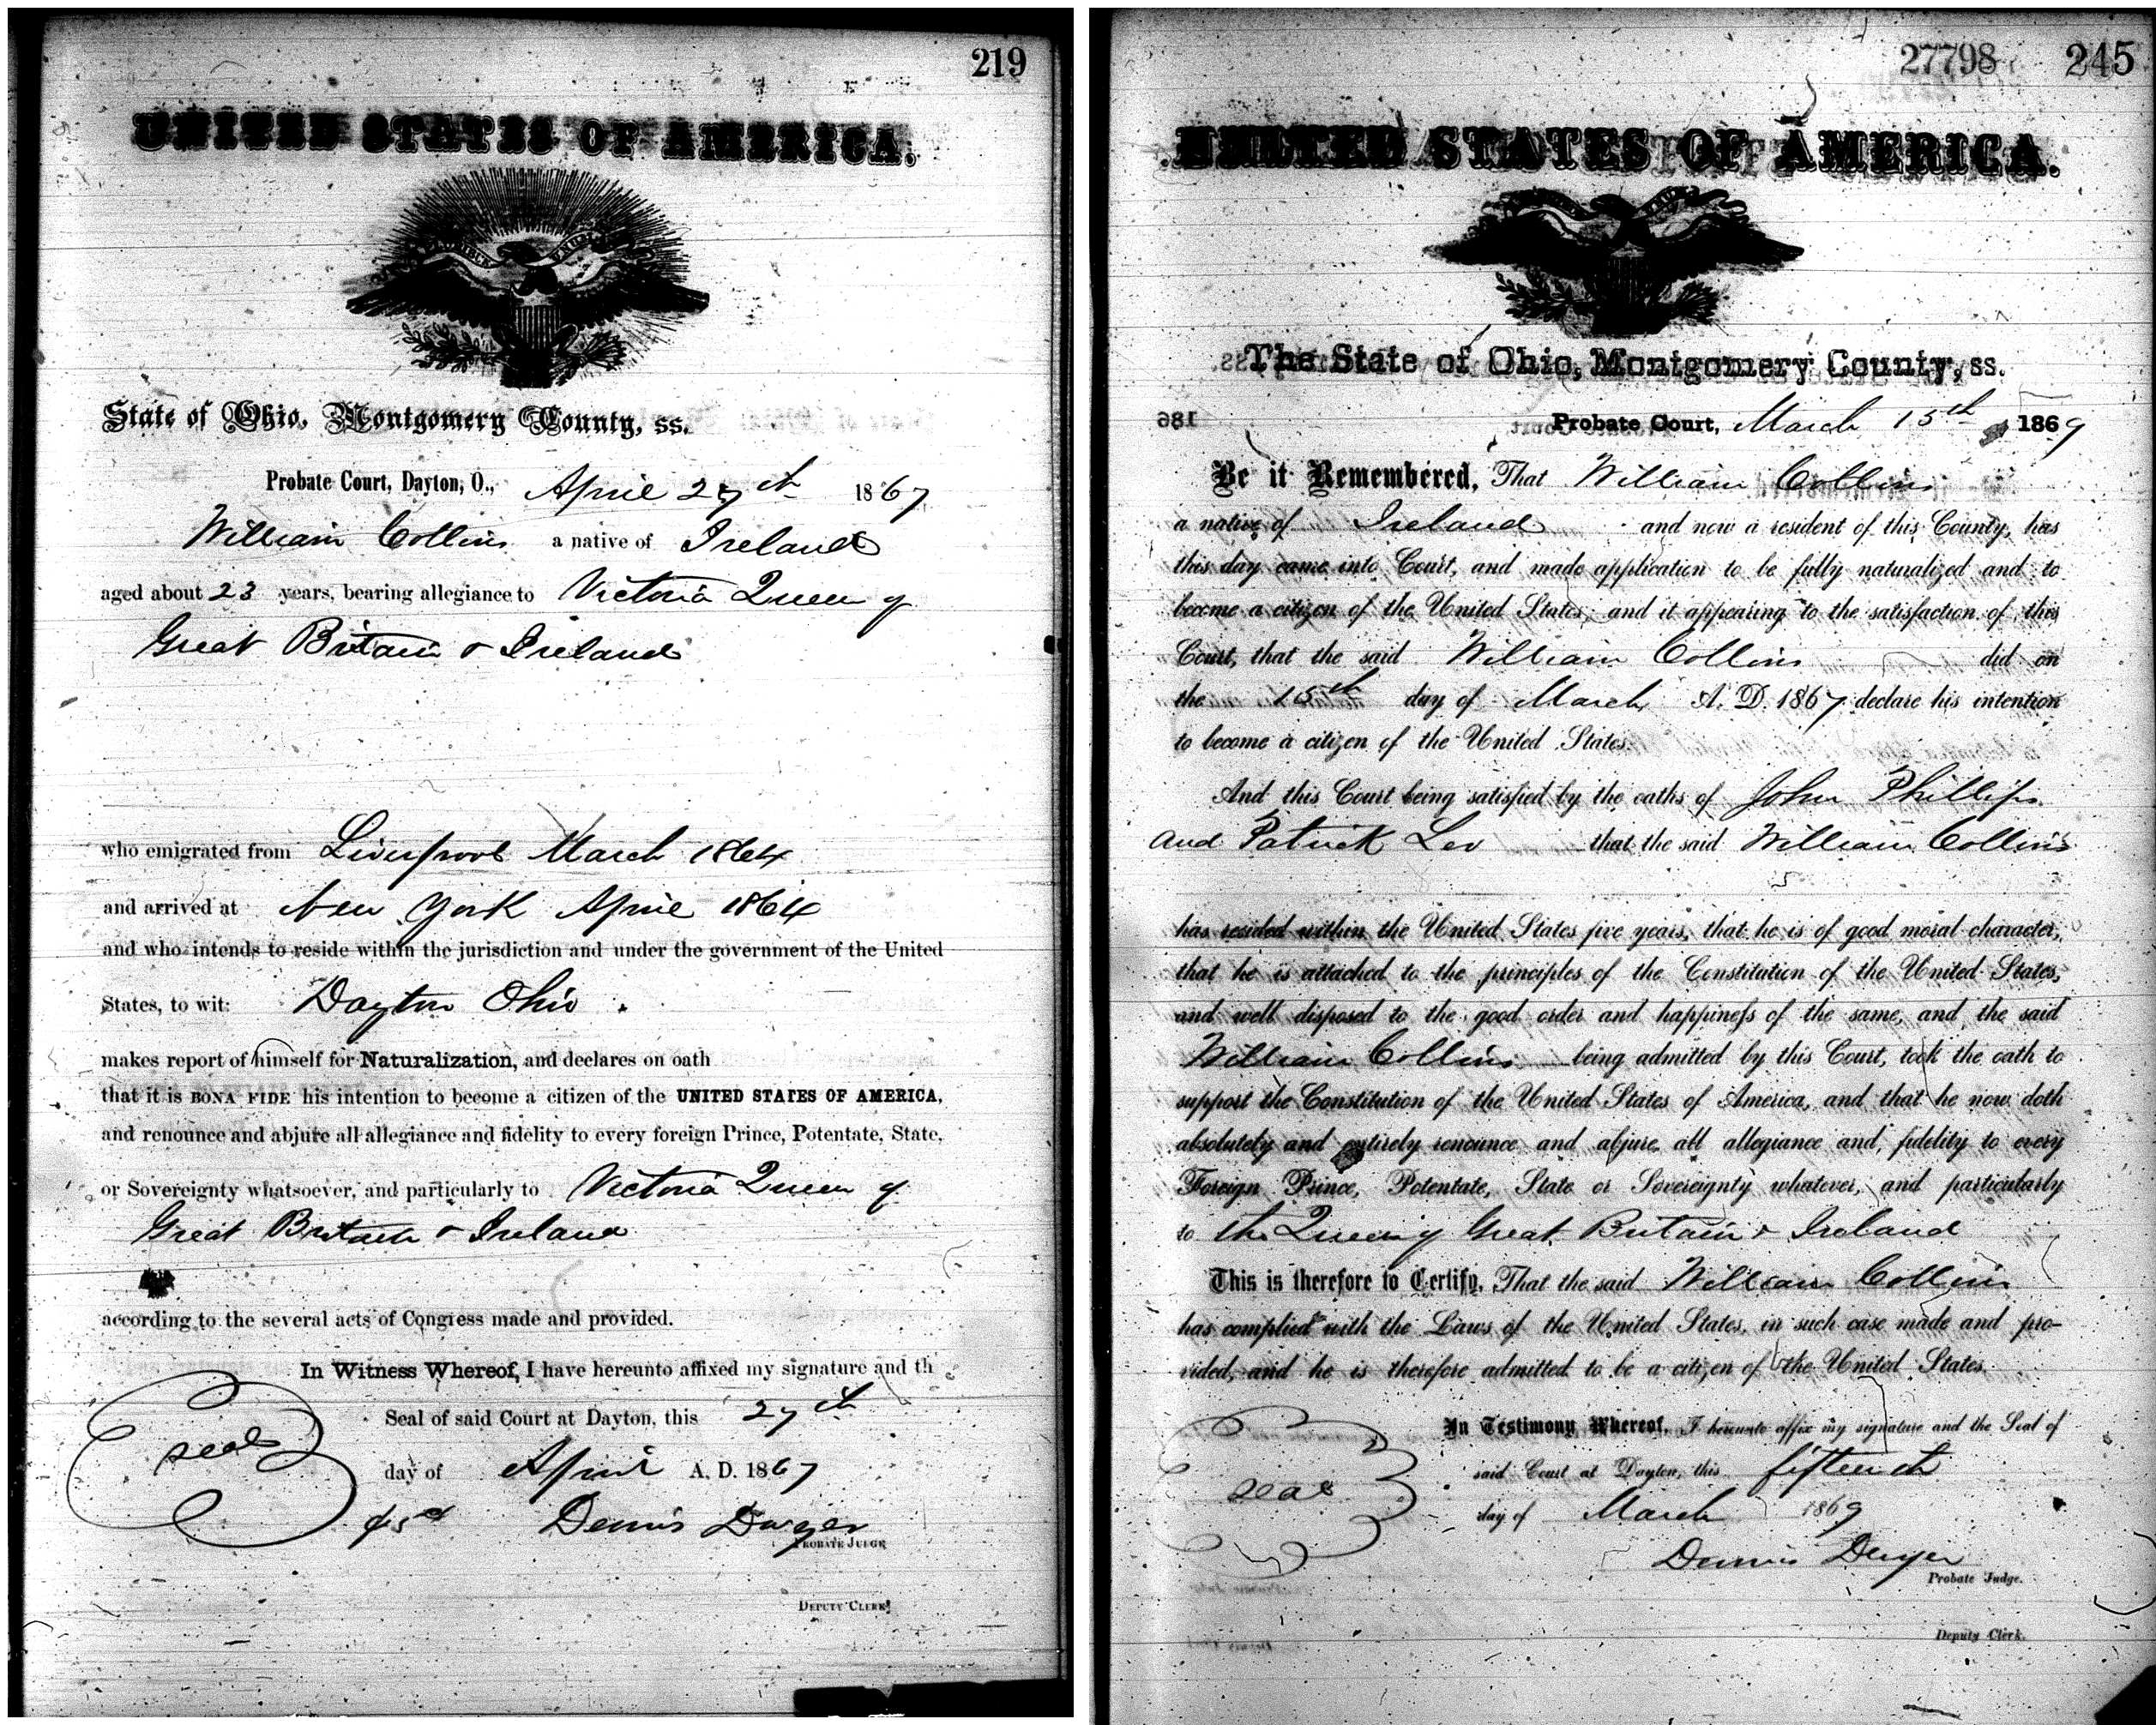 Naturalization documents for William Collins, filed in Montgomery County, Ohio, 1867 and 1869.